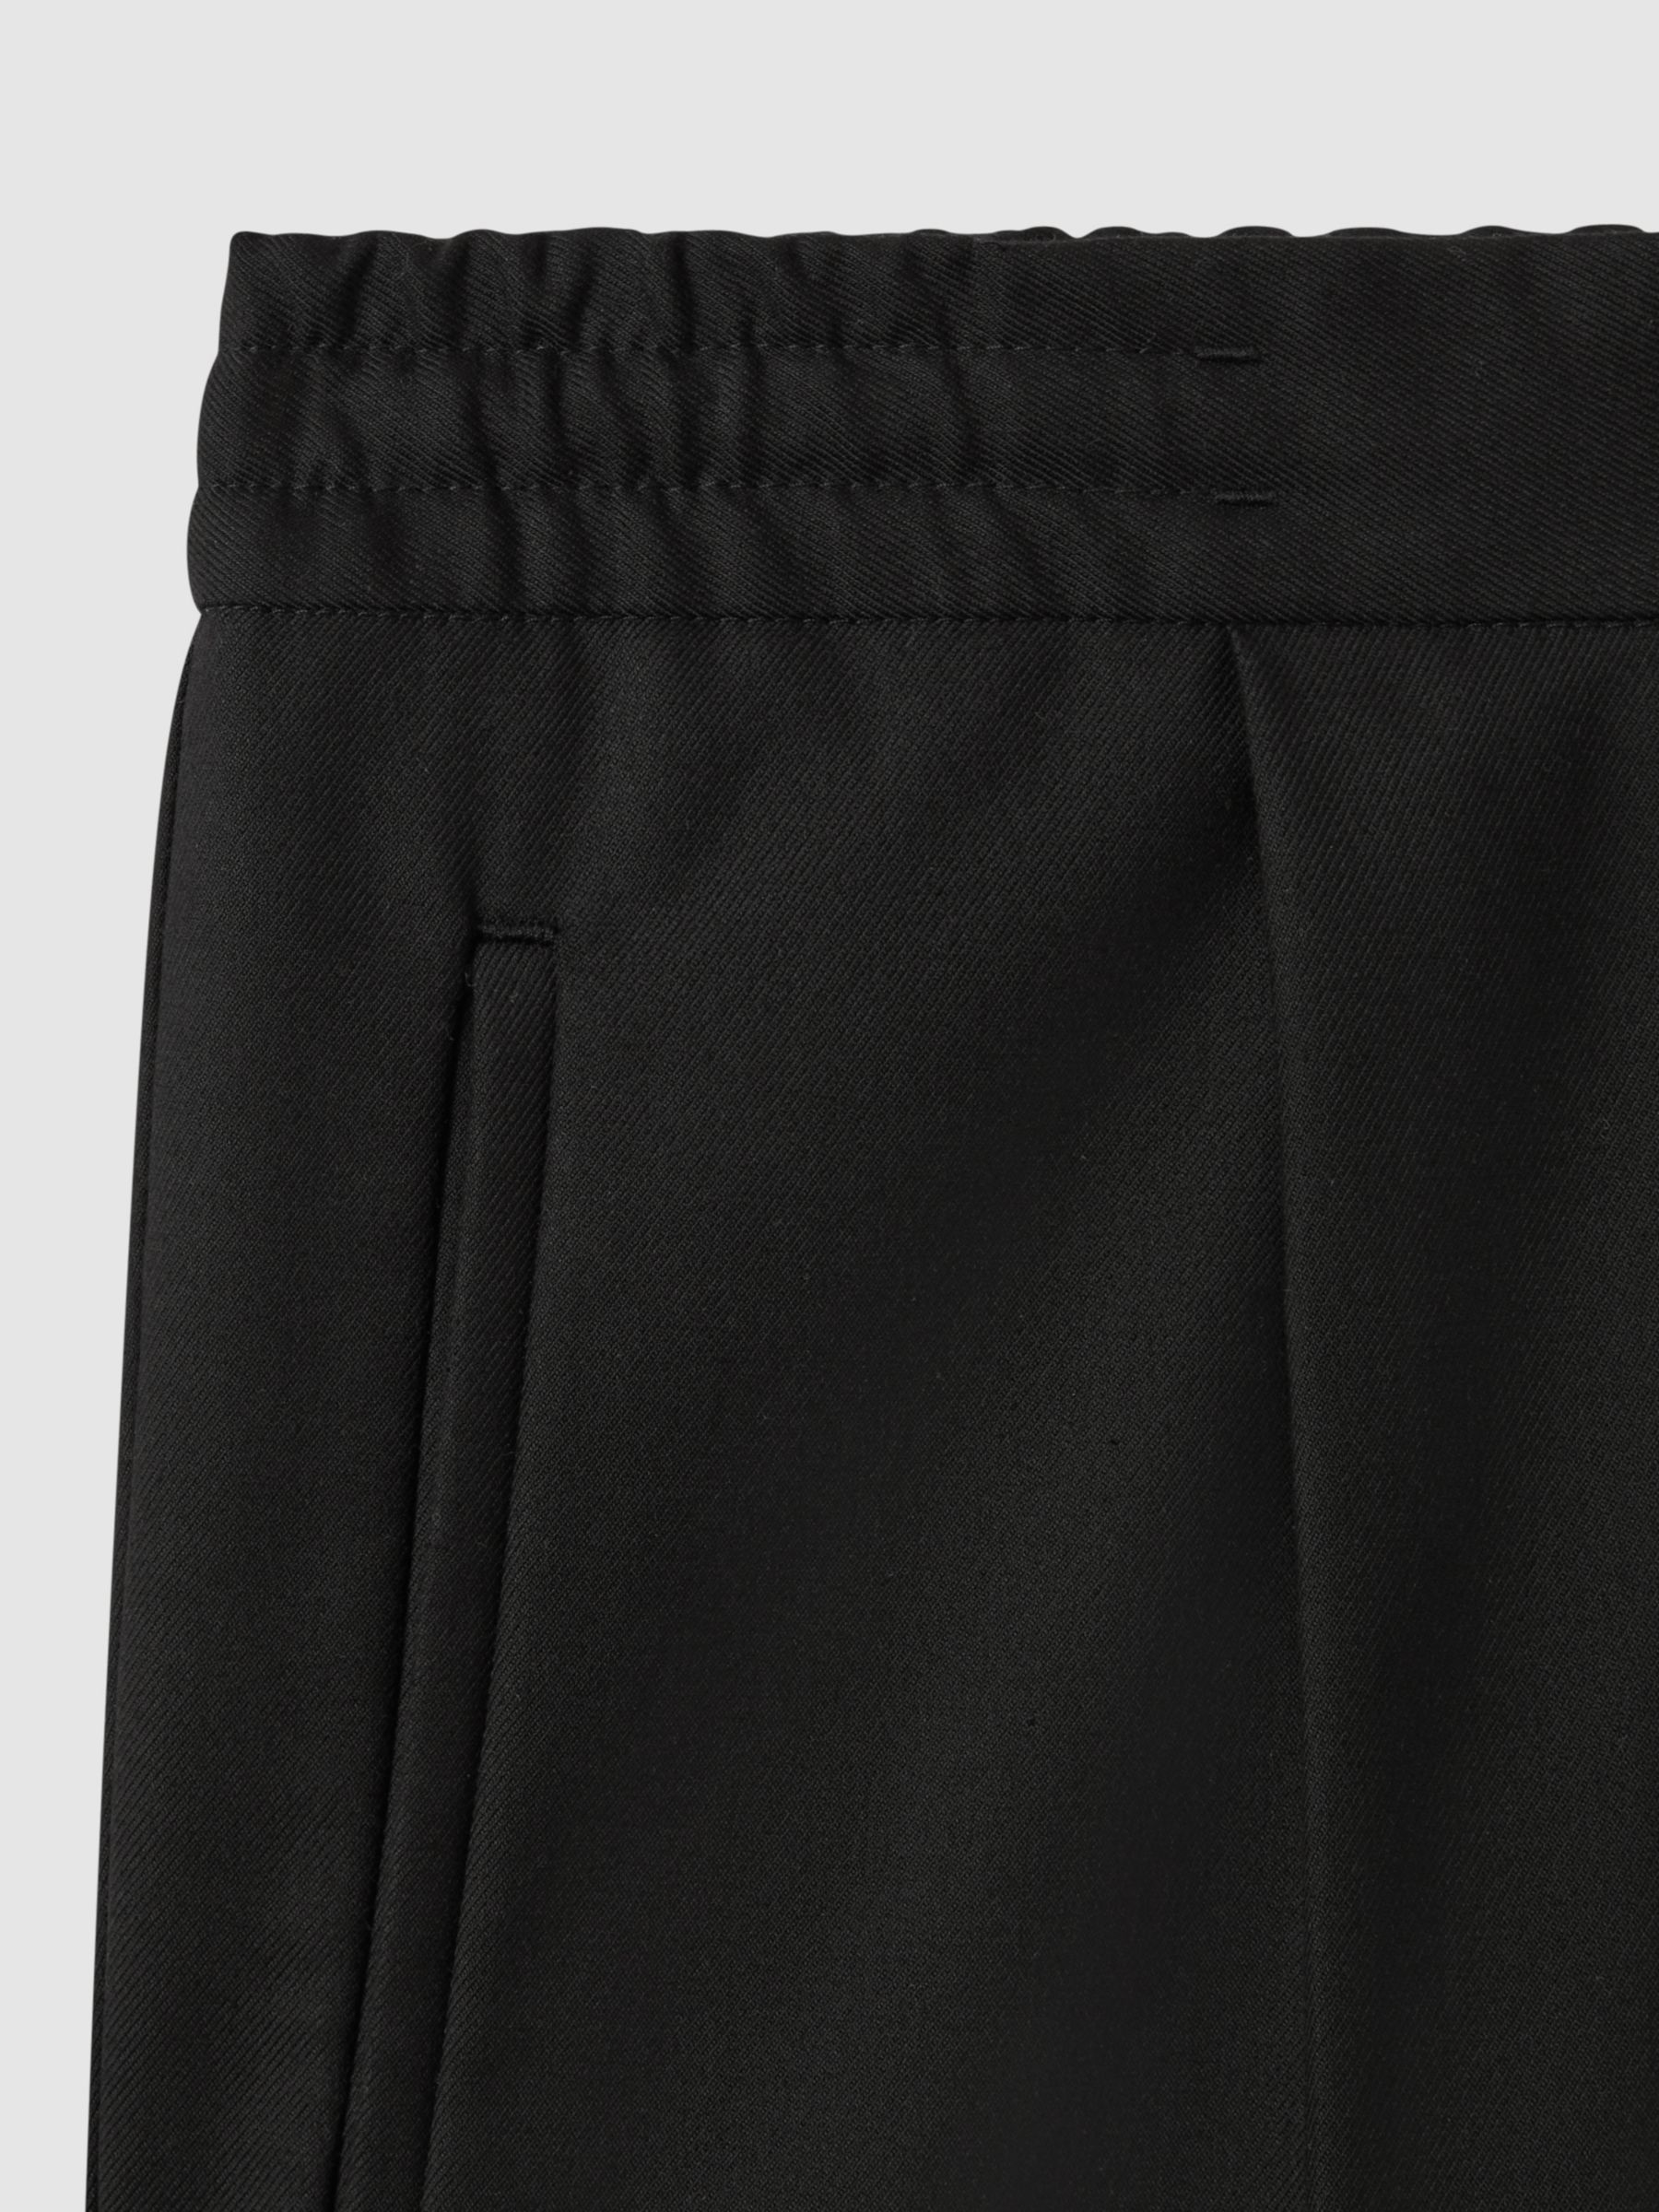 Reiss Brighton Pleated Relaxed Trousers, Black, 36R